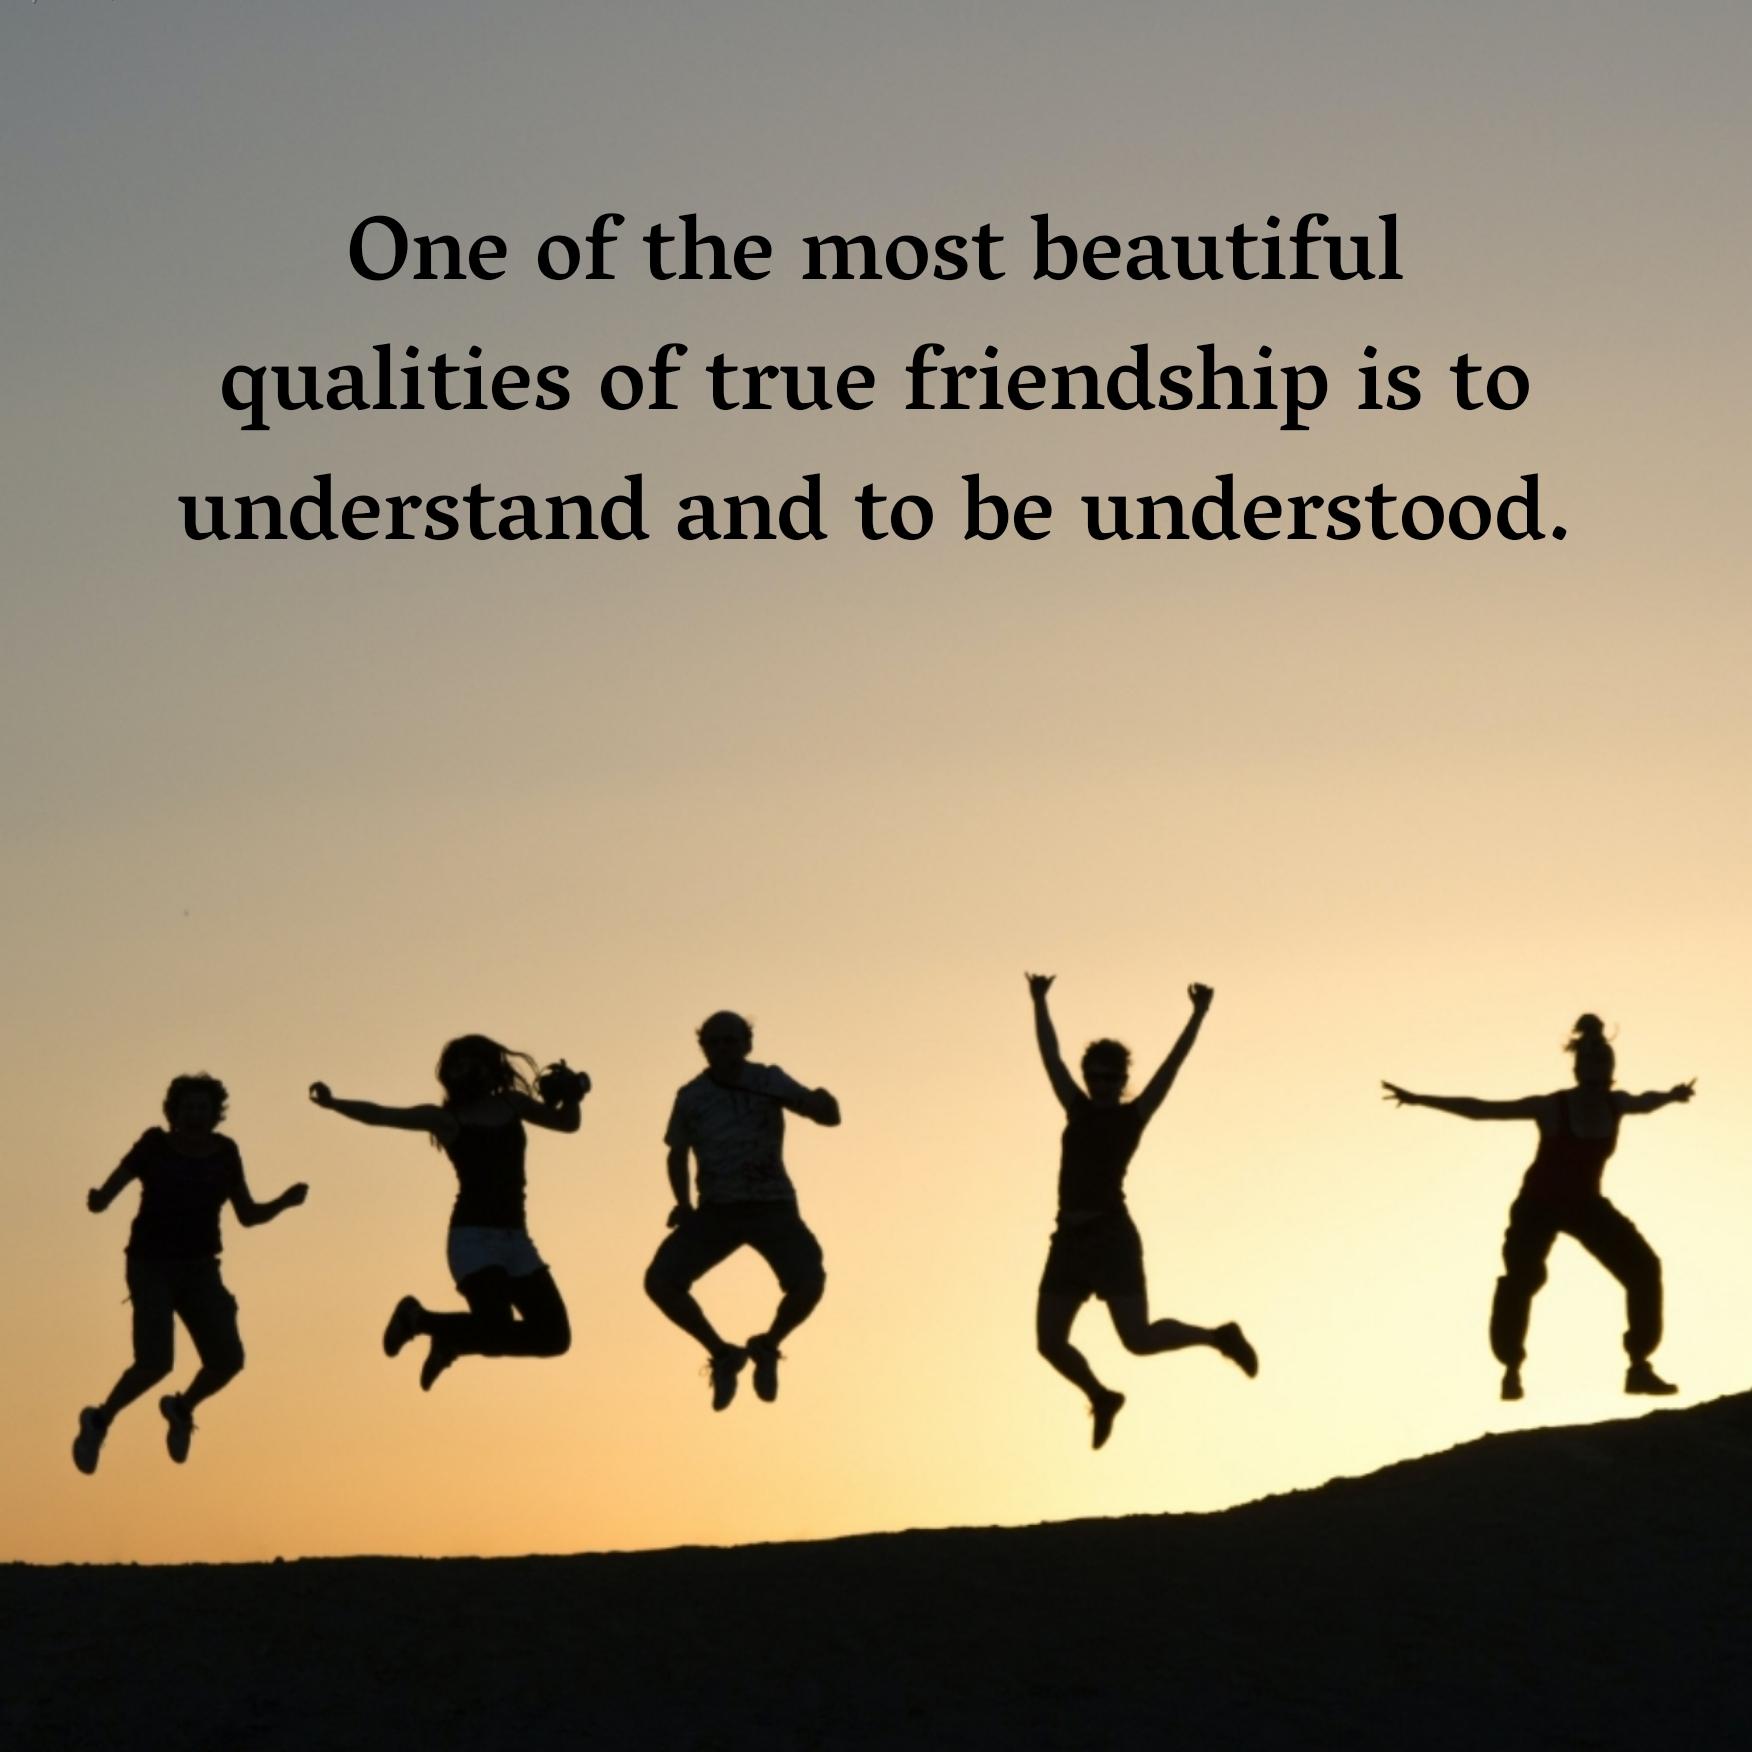 One of the most beautiful qualities of true friendship is to understand and to be understood